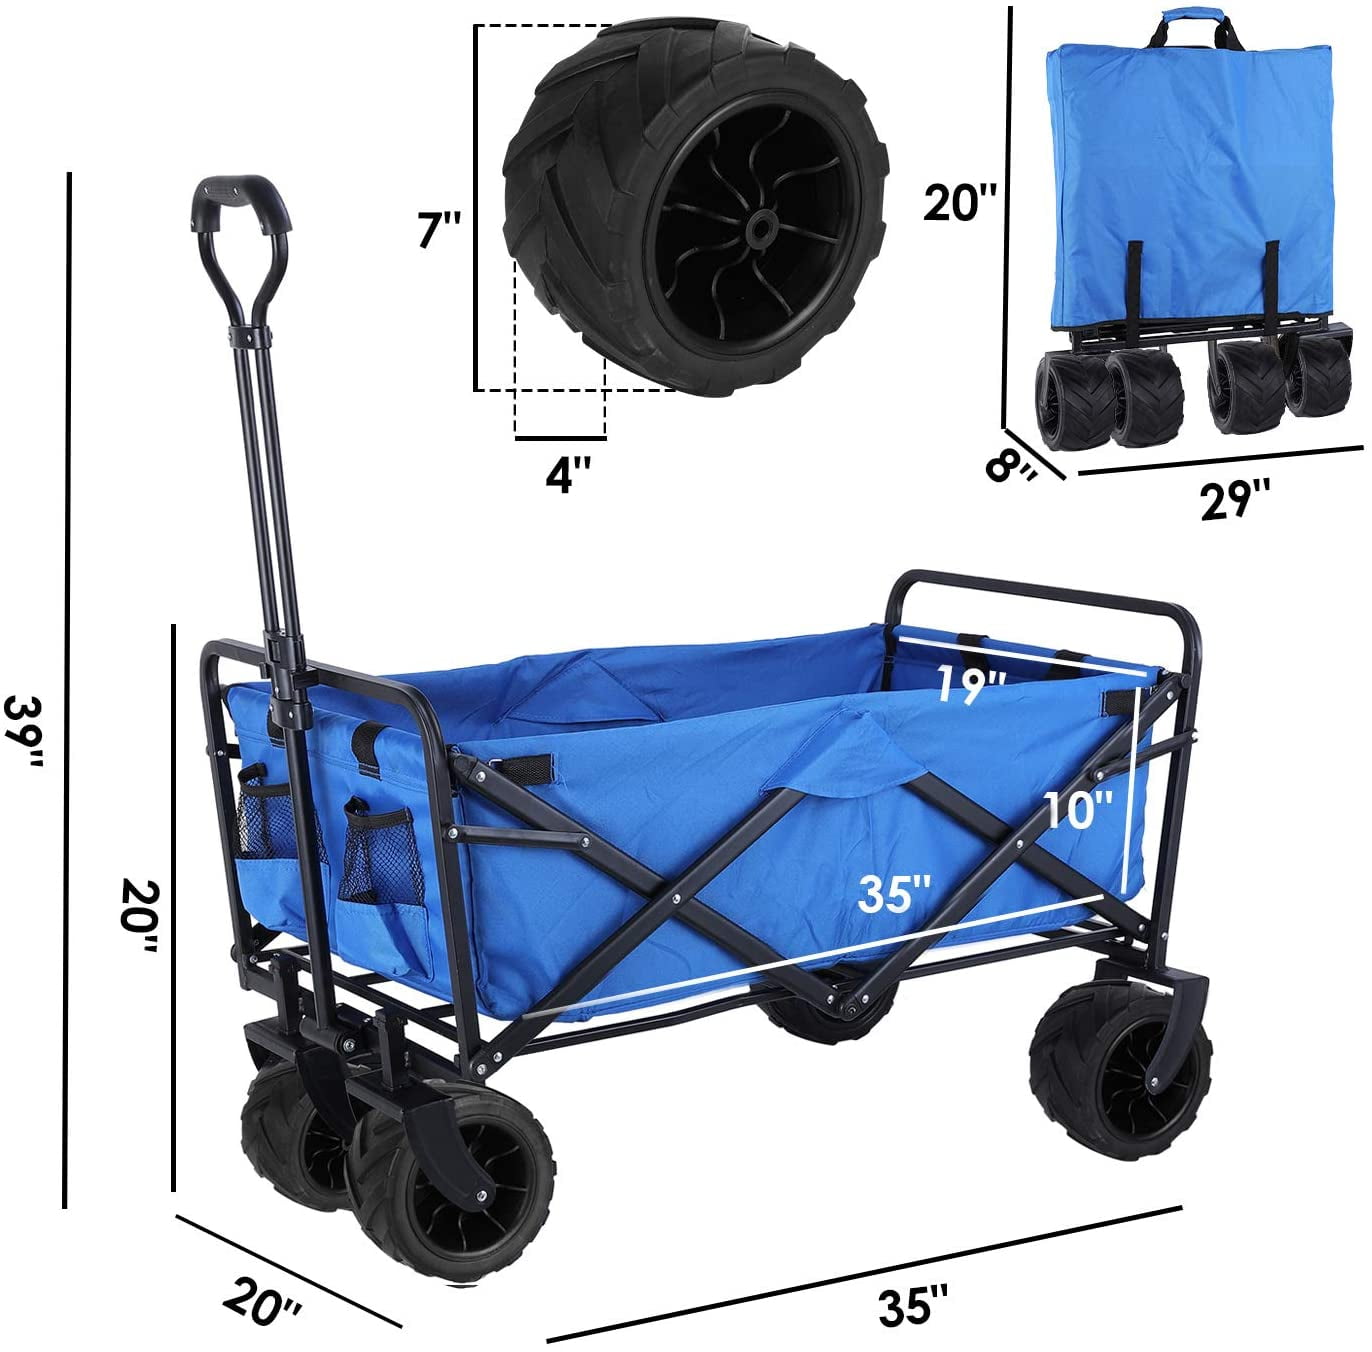 Blue Folding Utility Wagon All Terrain Outdoor Sports REDCAMP Collapsible Wagon Cart,1200D Removable Canvas & Brake Wheel with Cooler Bag 